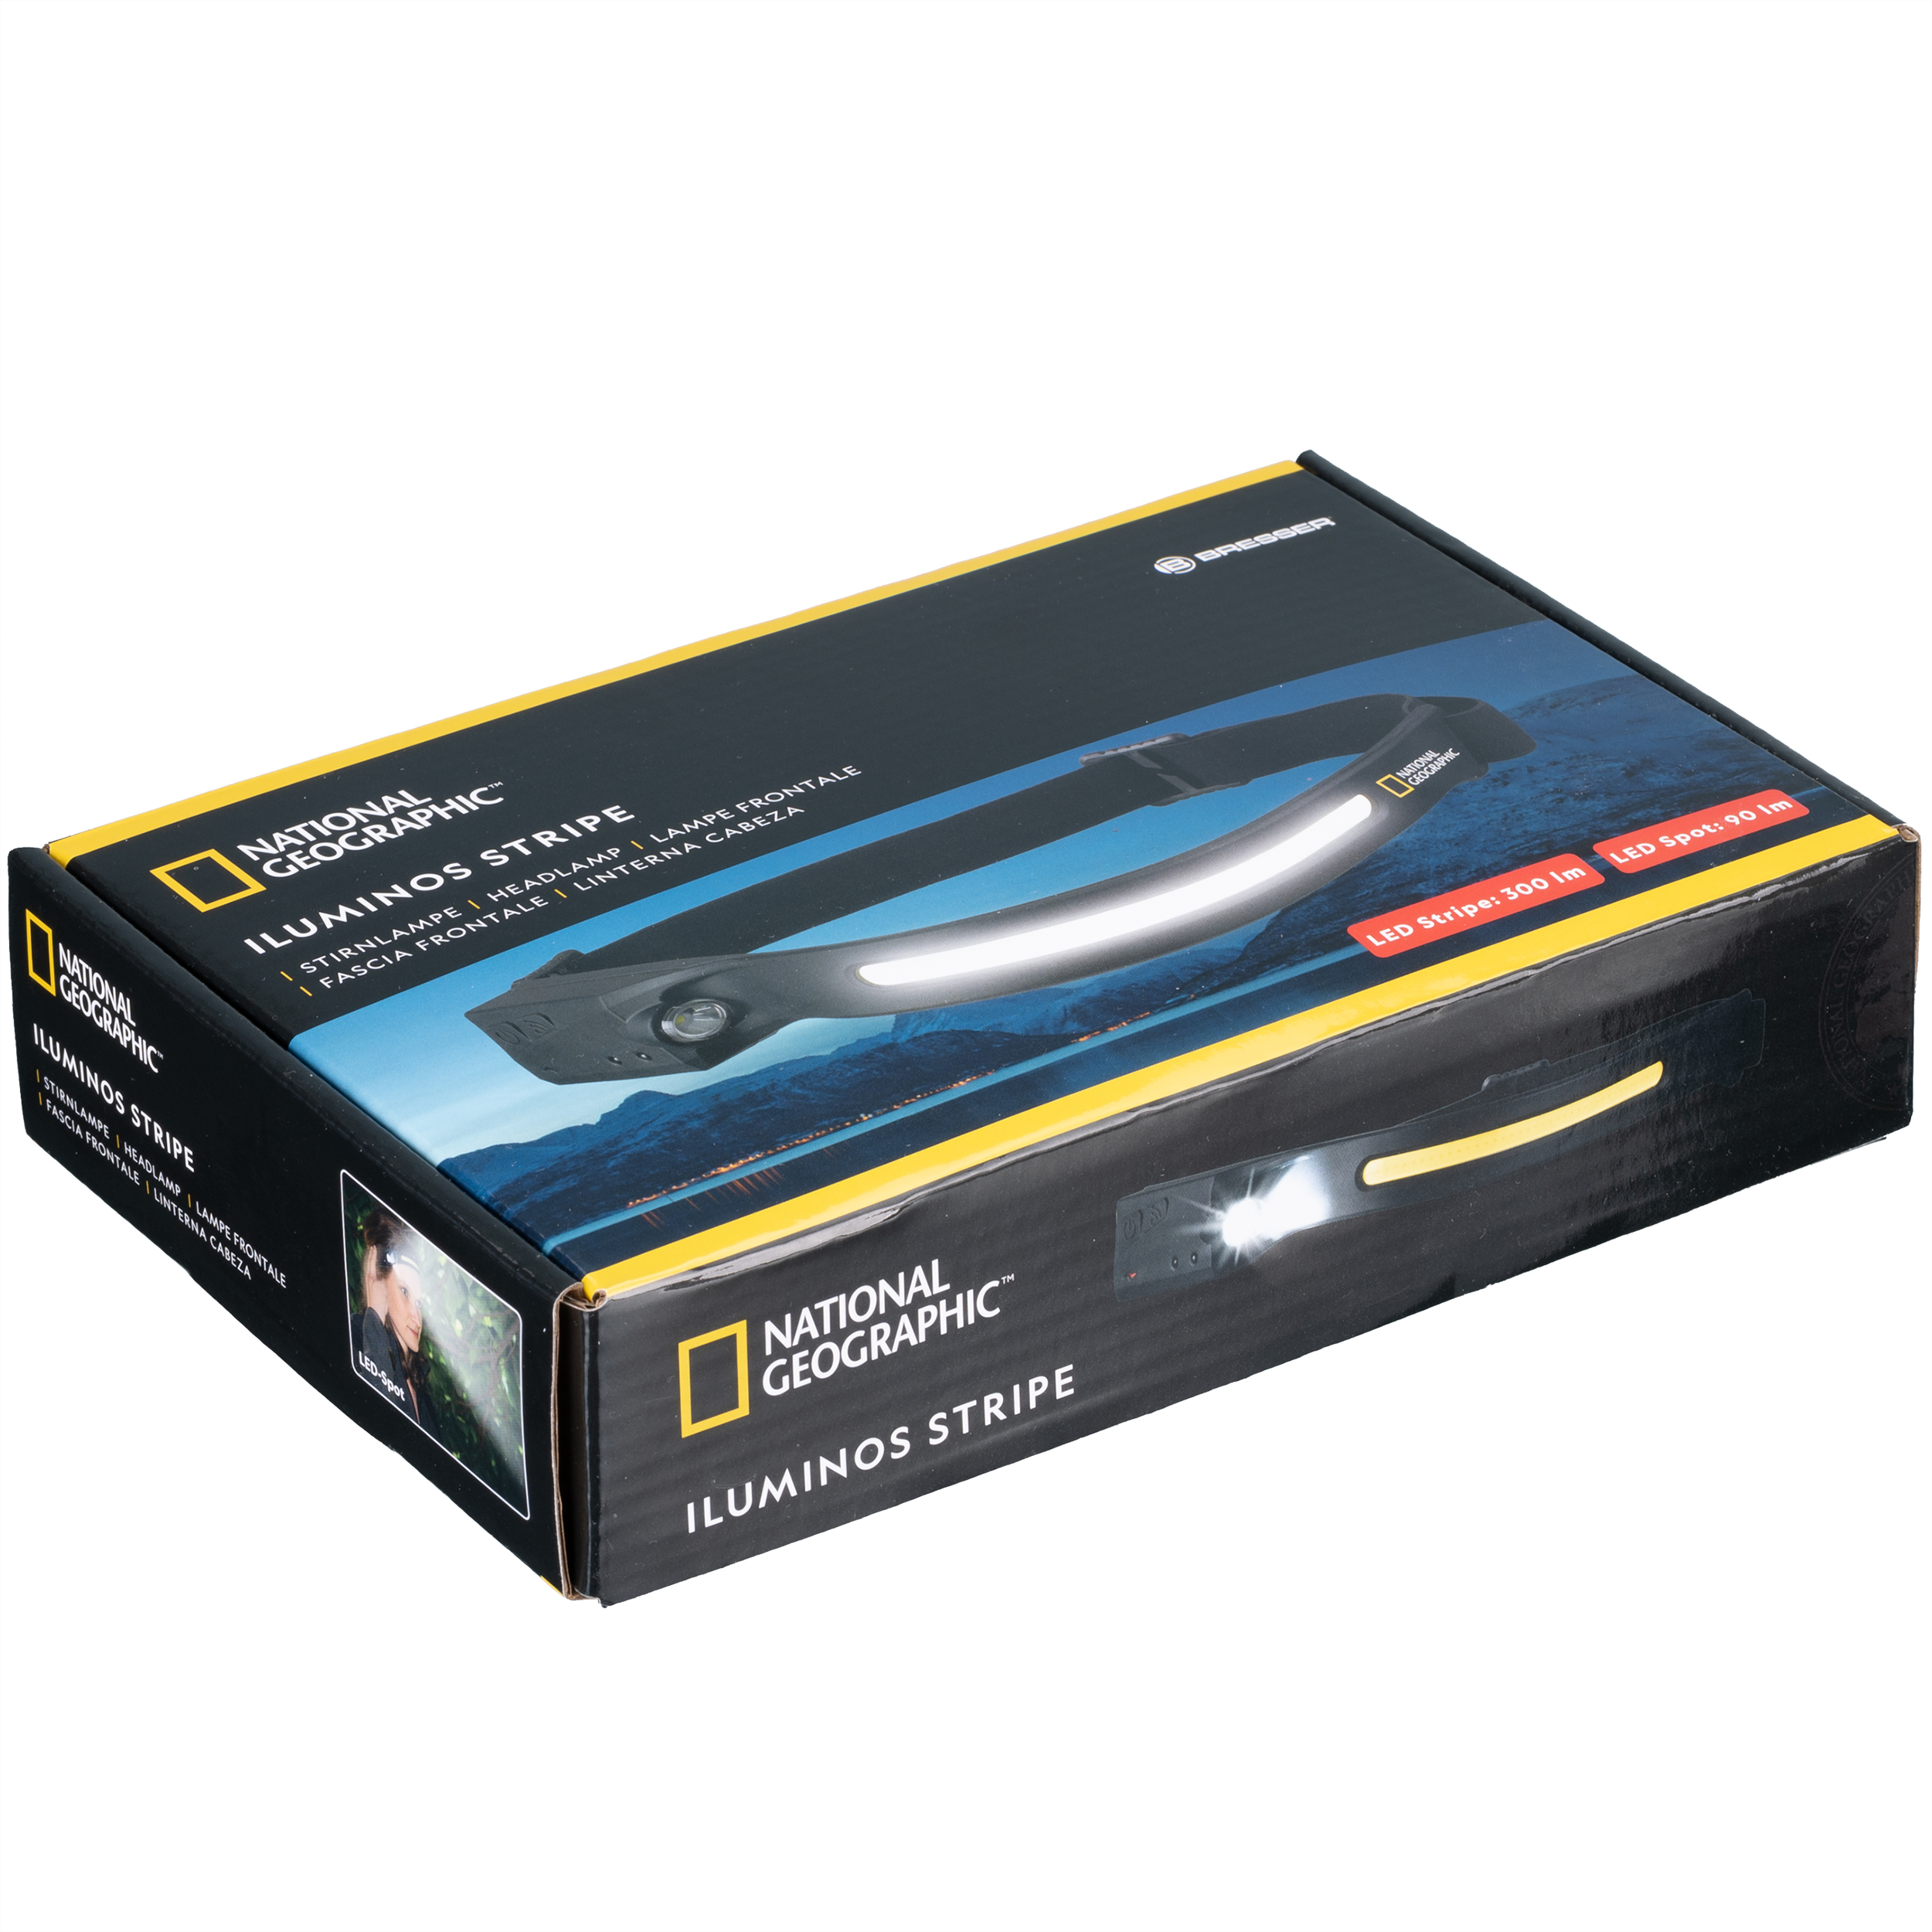 Lampada frontale NATIONAL GEOGRAPHIC Iluminos Stripe con strisce LED